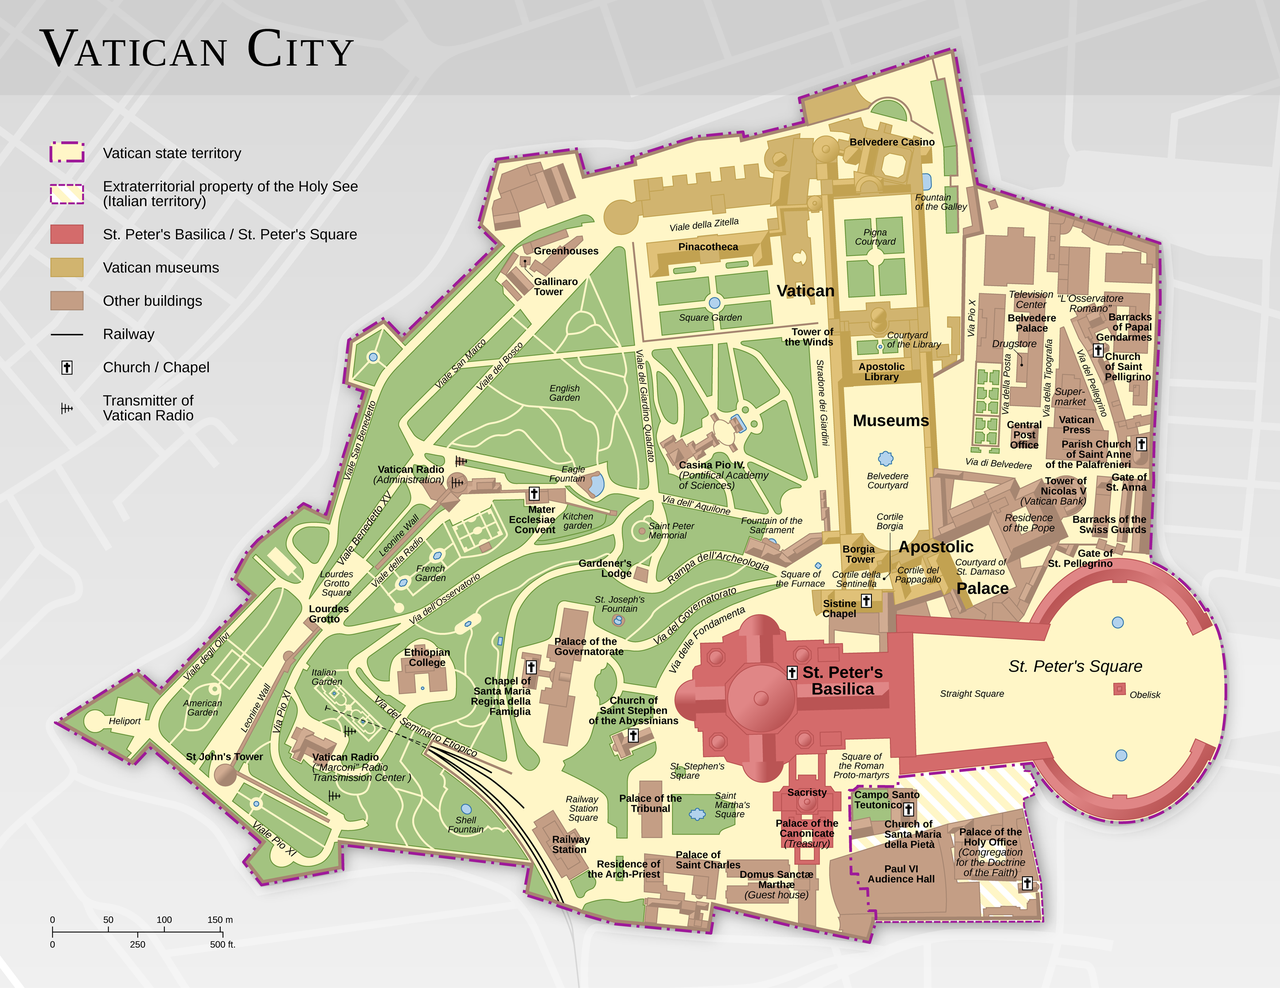 Vatican City map from Wikimedia commons